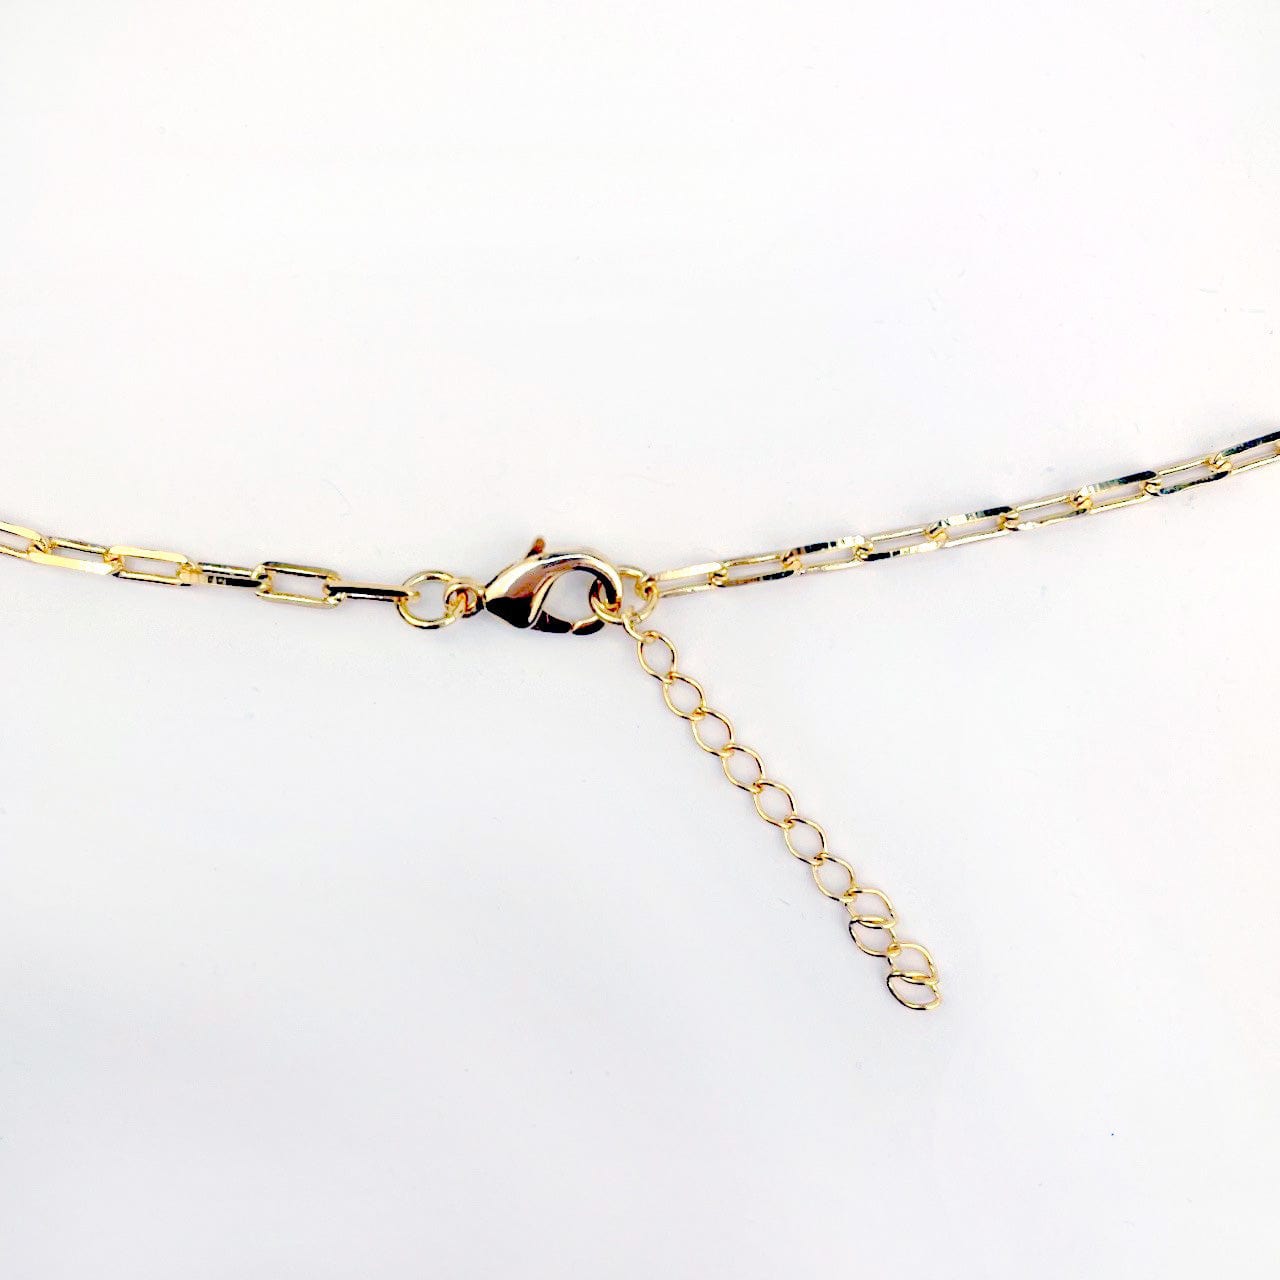 Large Link Chain and lobster clasp, showing extra chain that makes it adjustable size